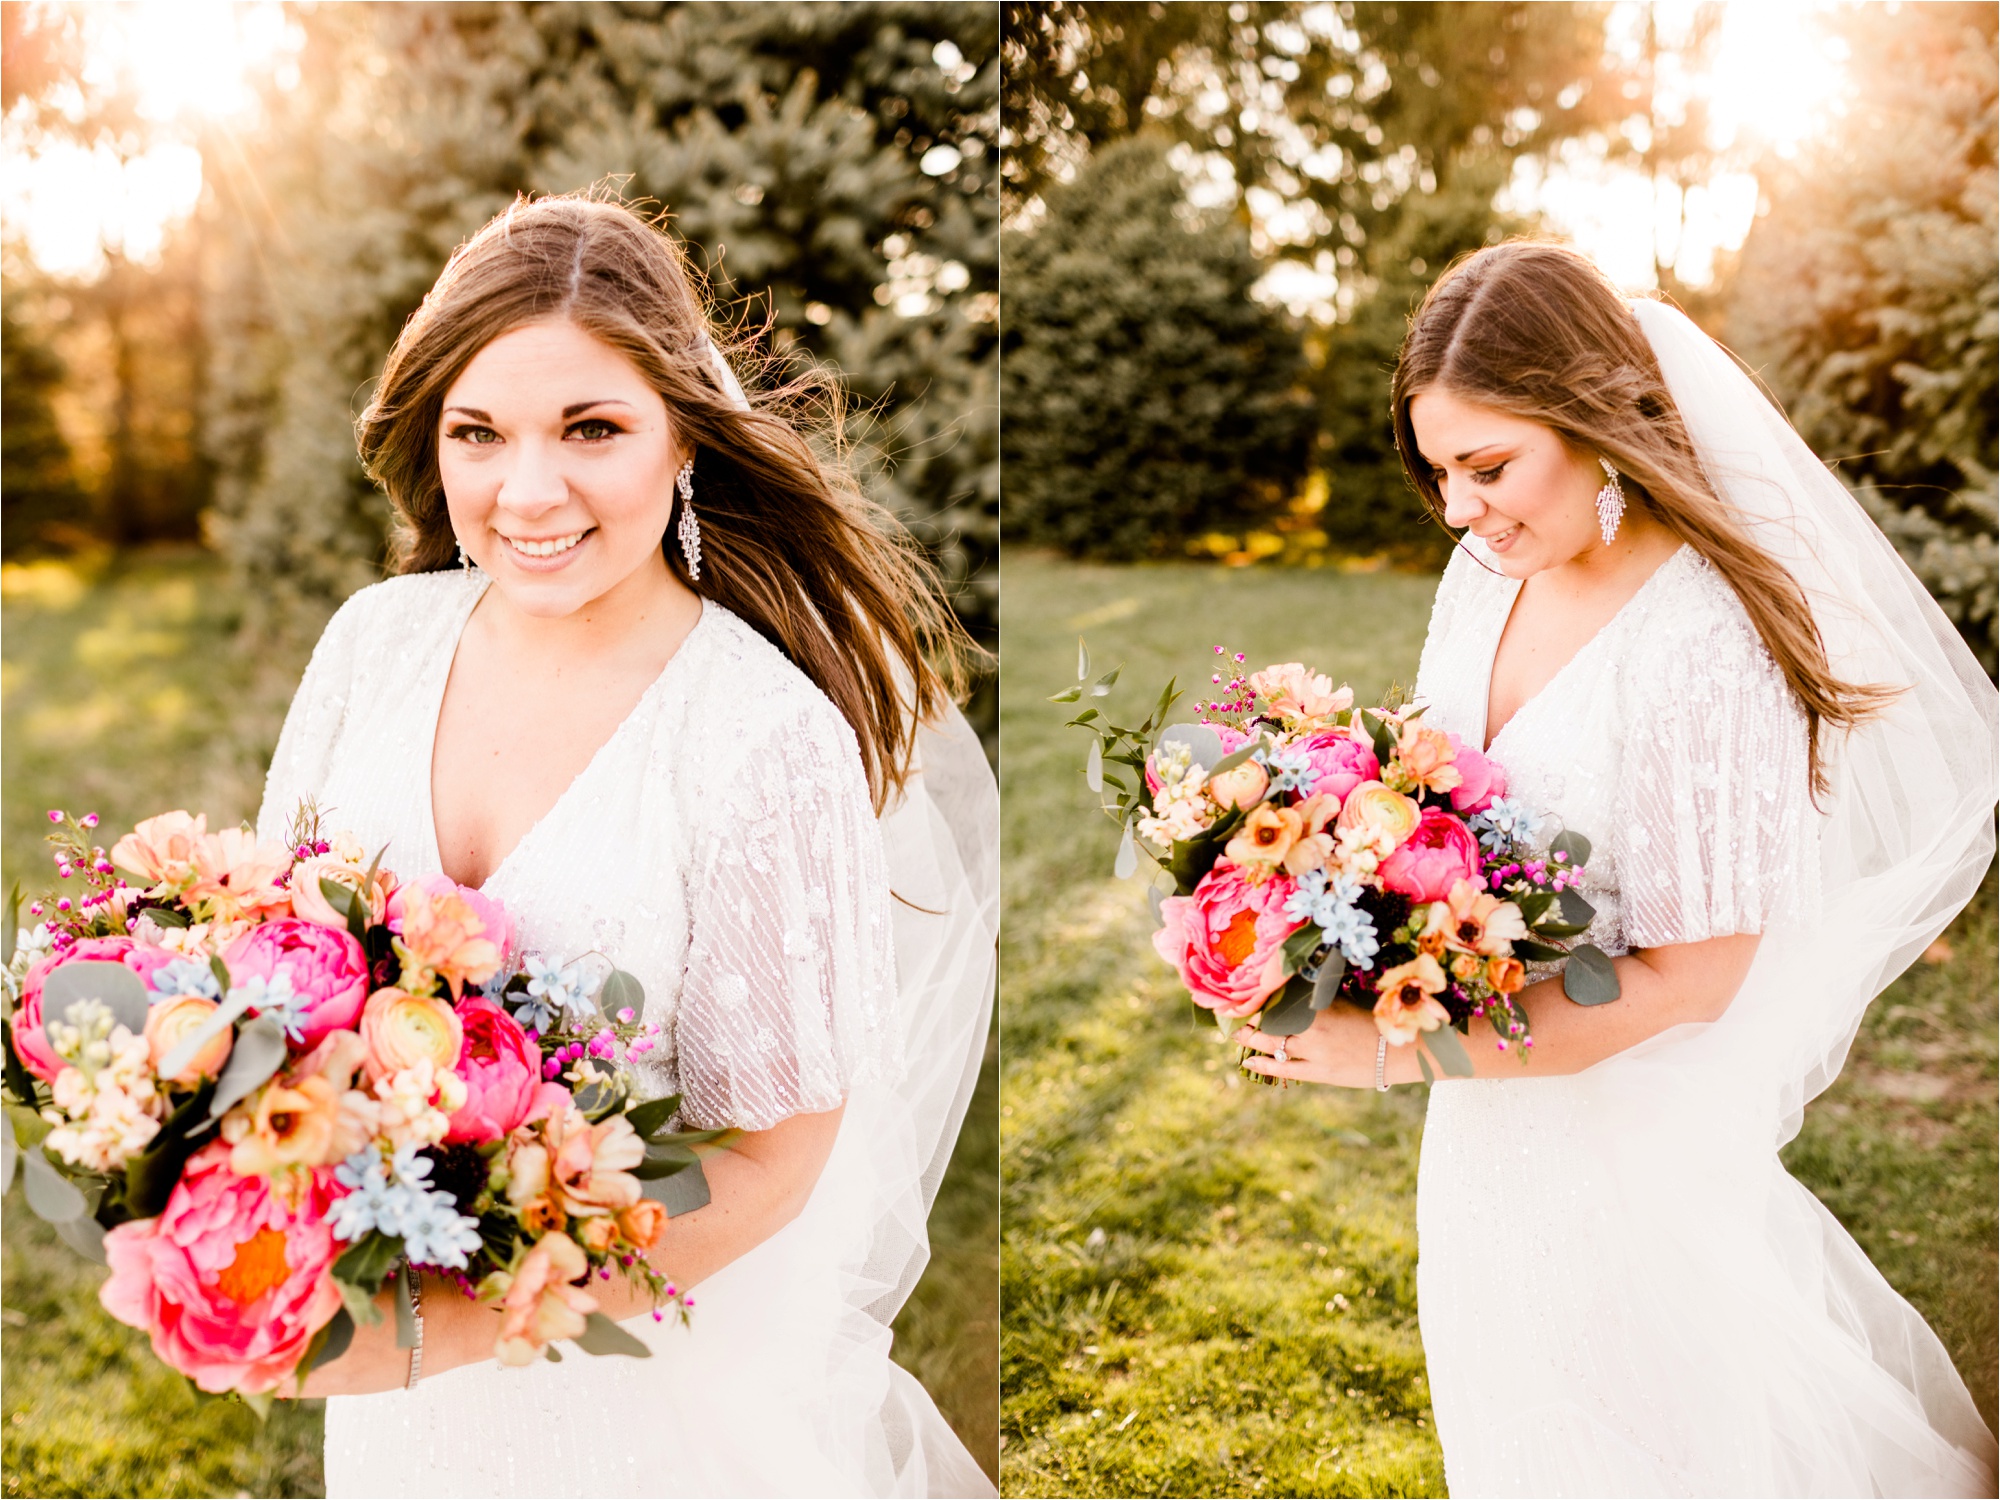 Caitlin and Luke Photography, Illinois Wedding Photographers, Champaign Wedding Photographers, Bloomington Normal Wedding Photographers, Romantic Red and Pink Sunset Styled Shoot_9561.jpg